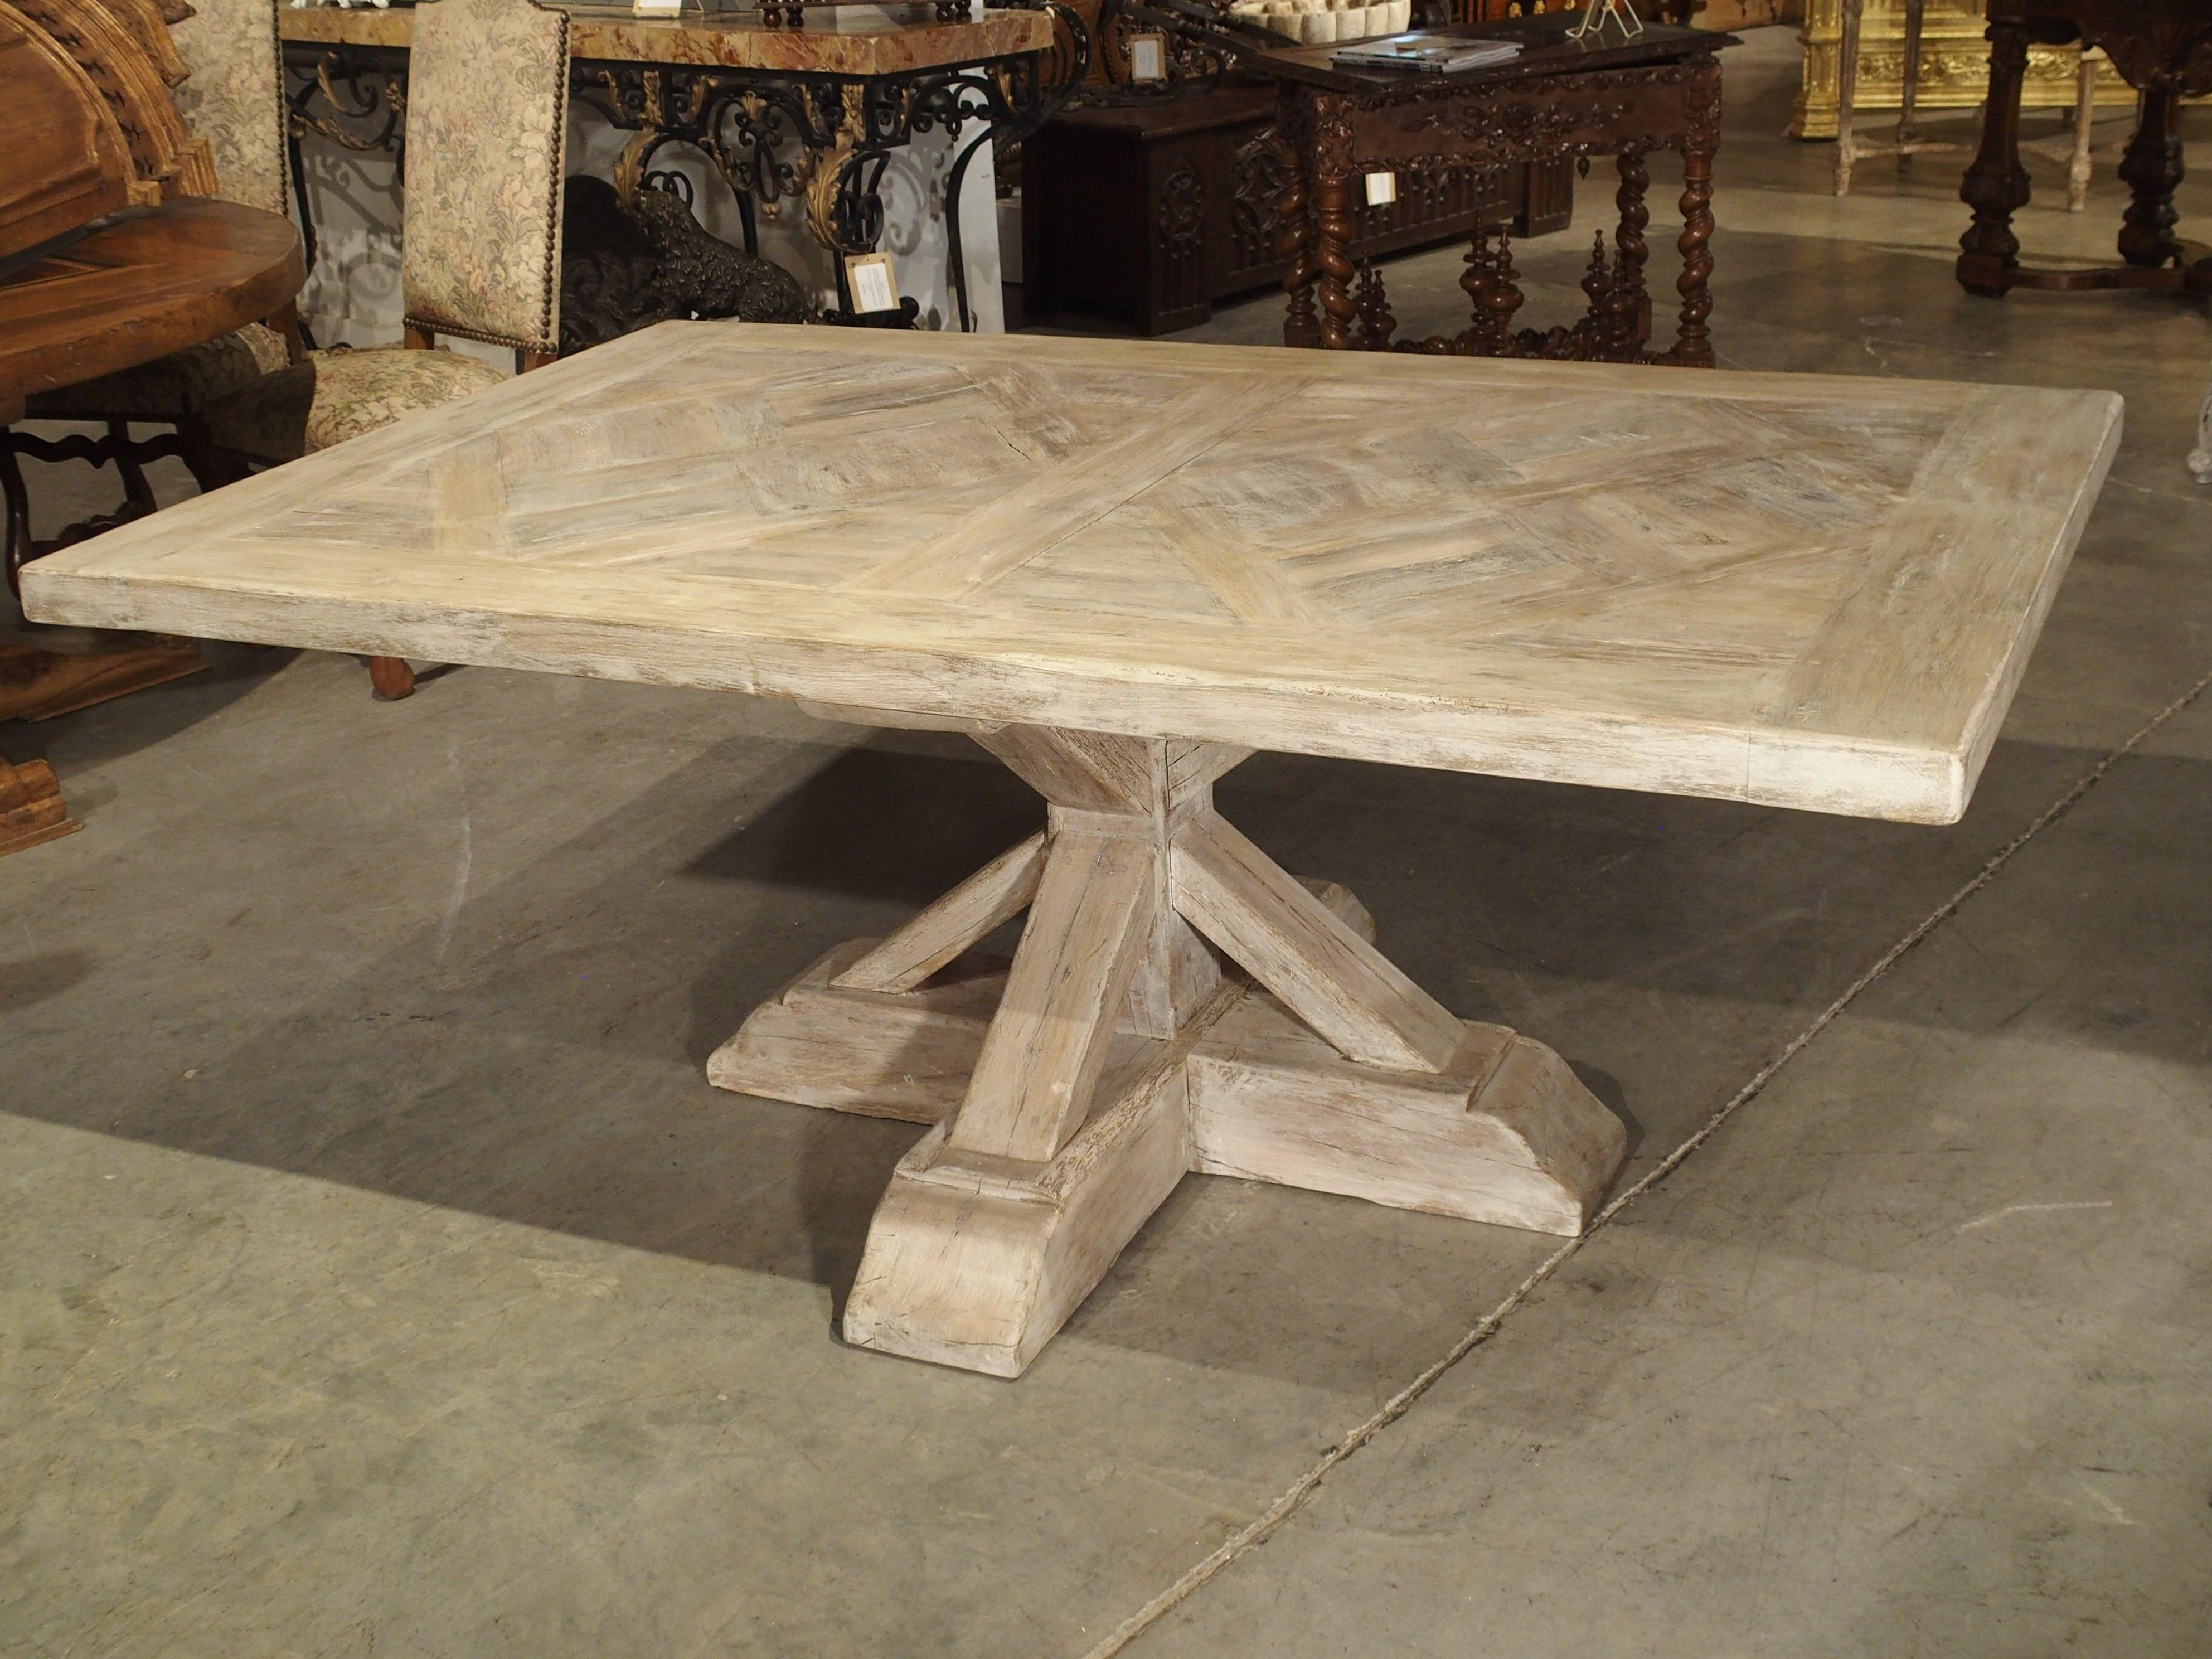 This whitewashed table was made near the Poitou region of western central France. It is constructed of thick salvaged boards of oak, and has a top that is made of two large parquet sections that are separated by a straight beam. Parquet describes